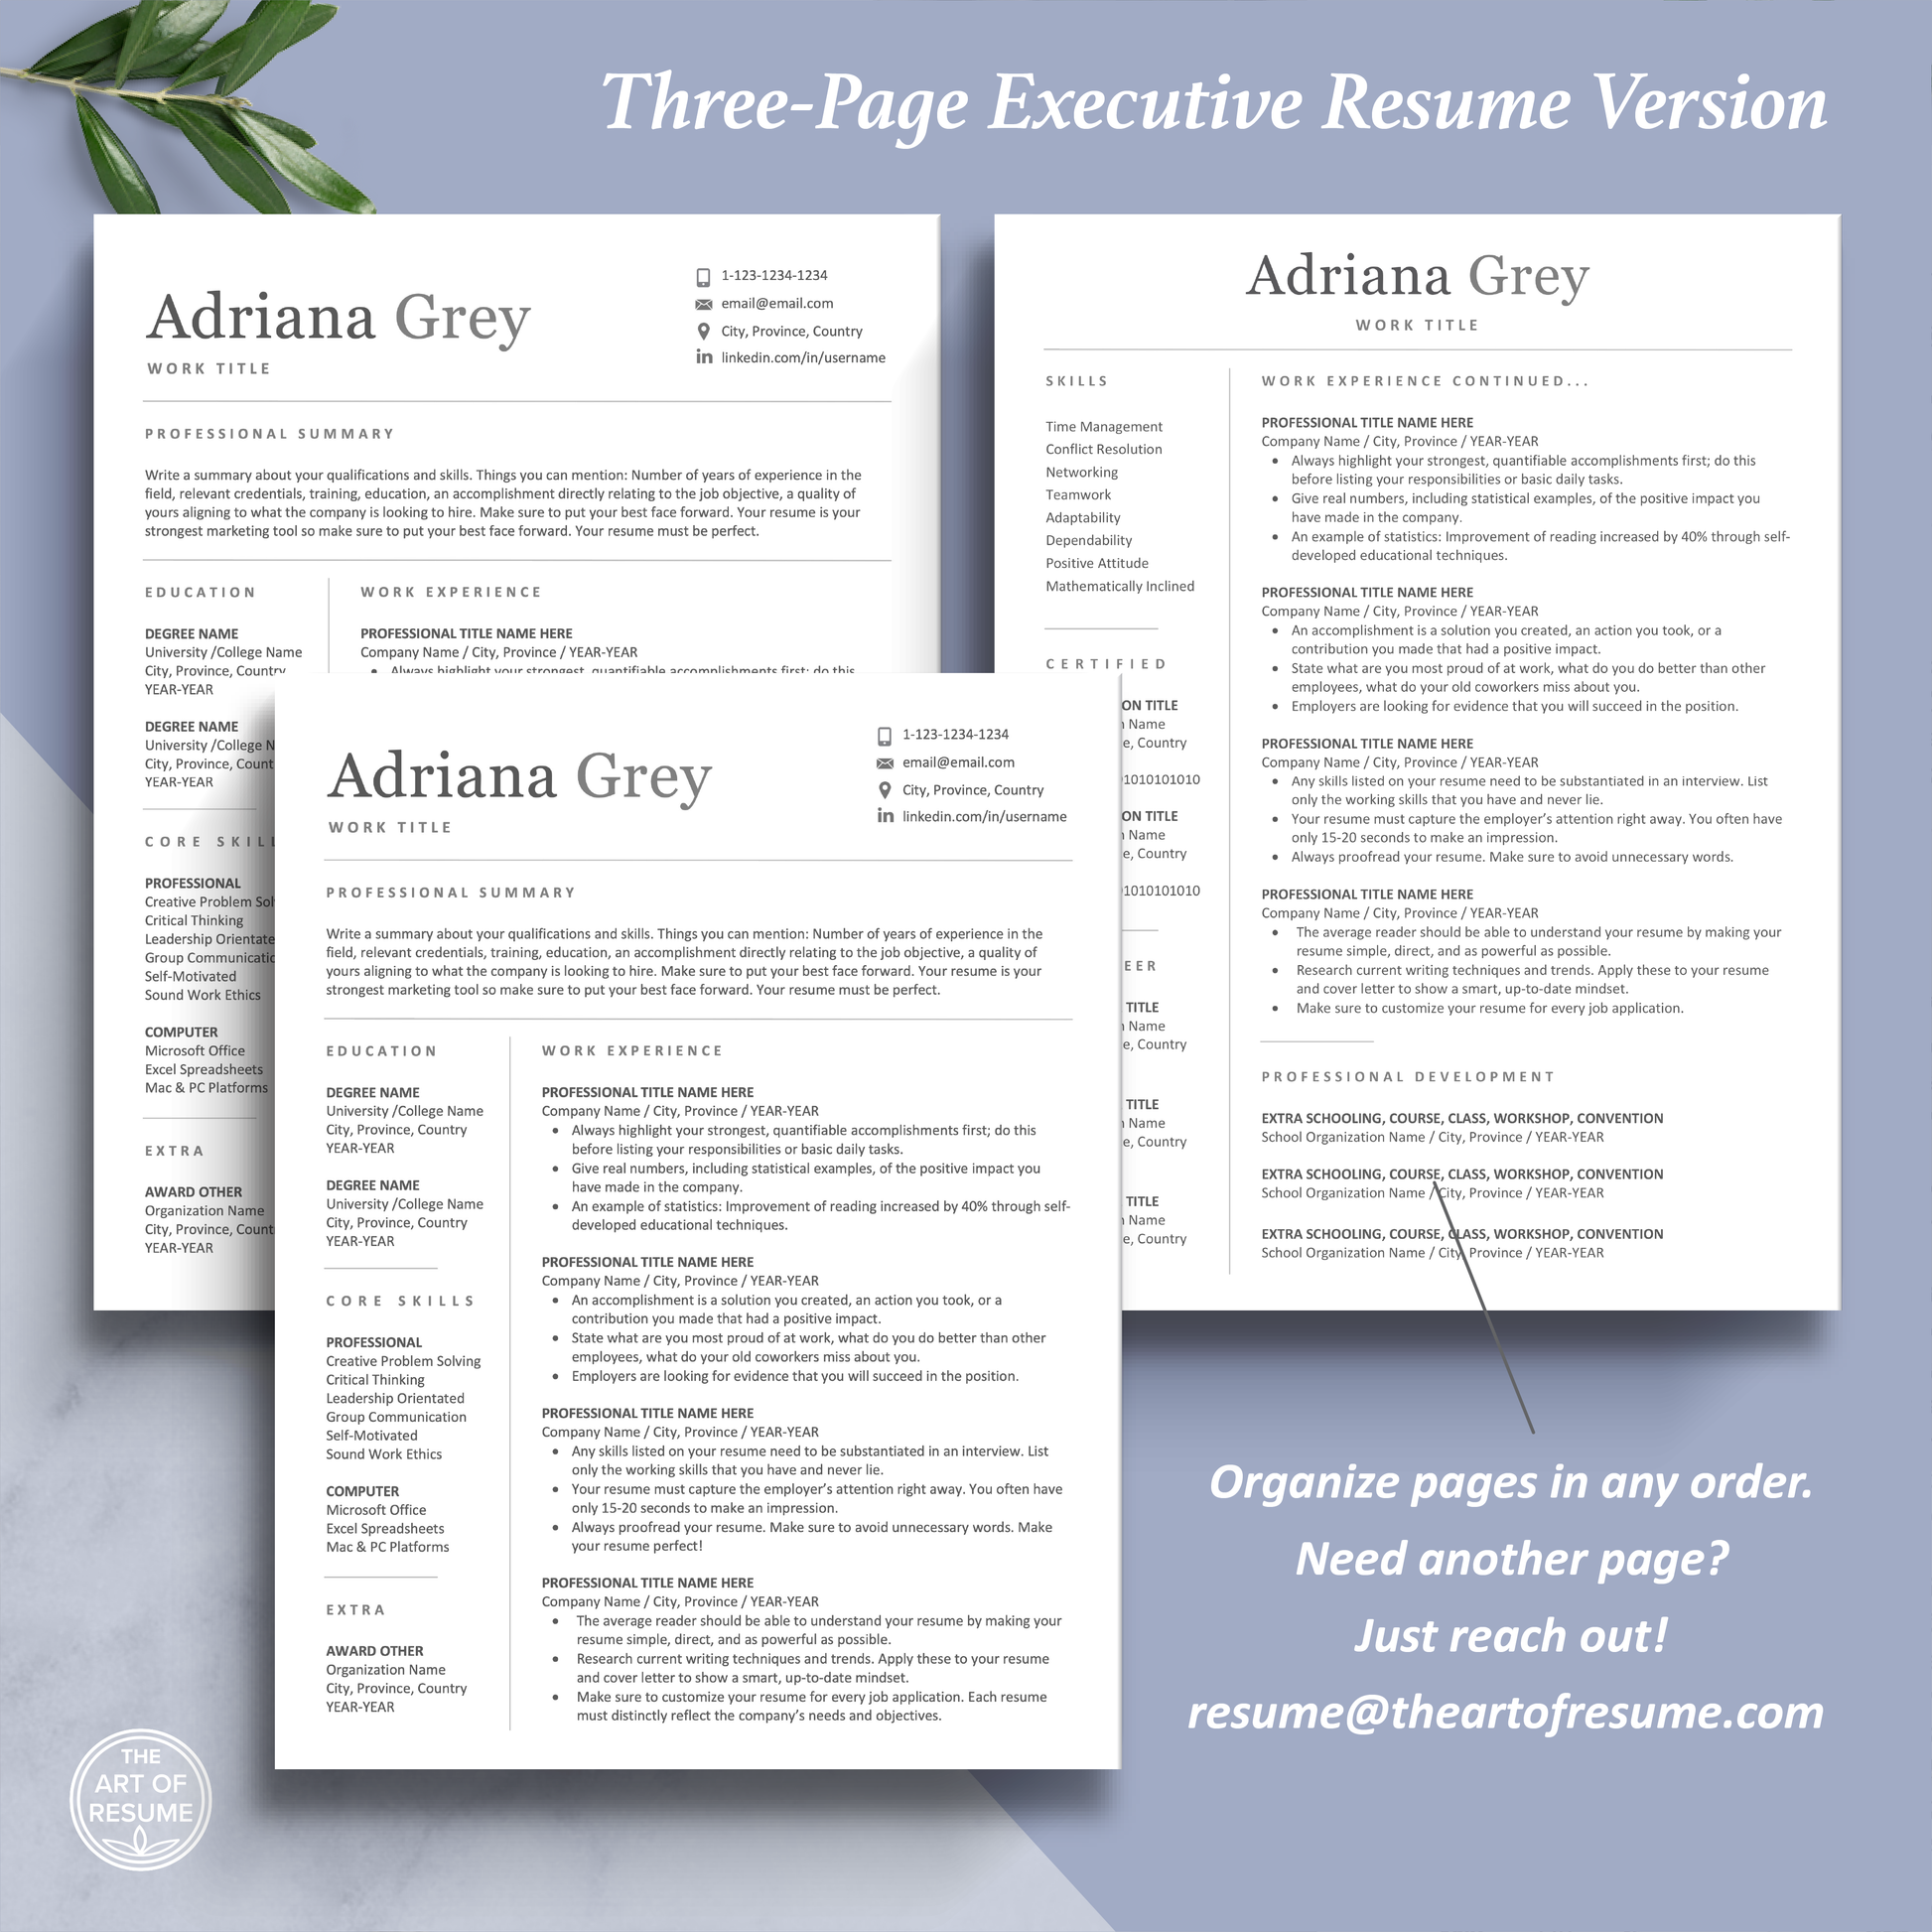 Simple Resume Template | Professional Resume | Cover Letter - The Art of Resume